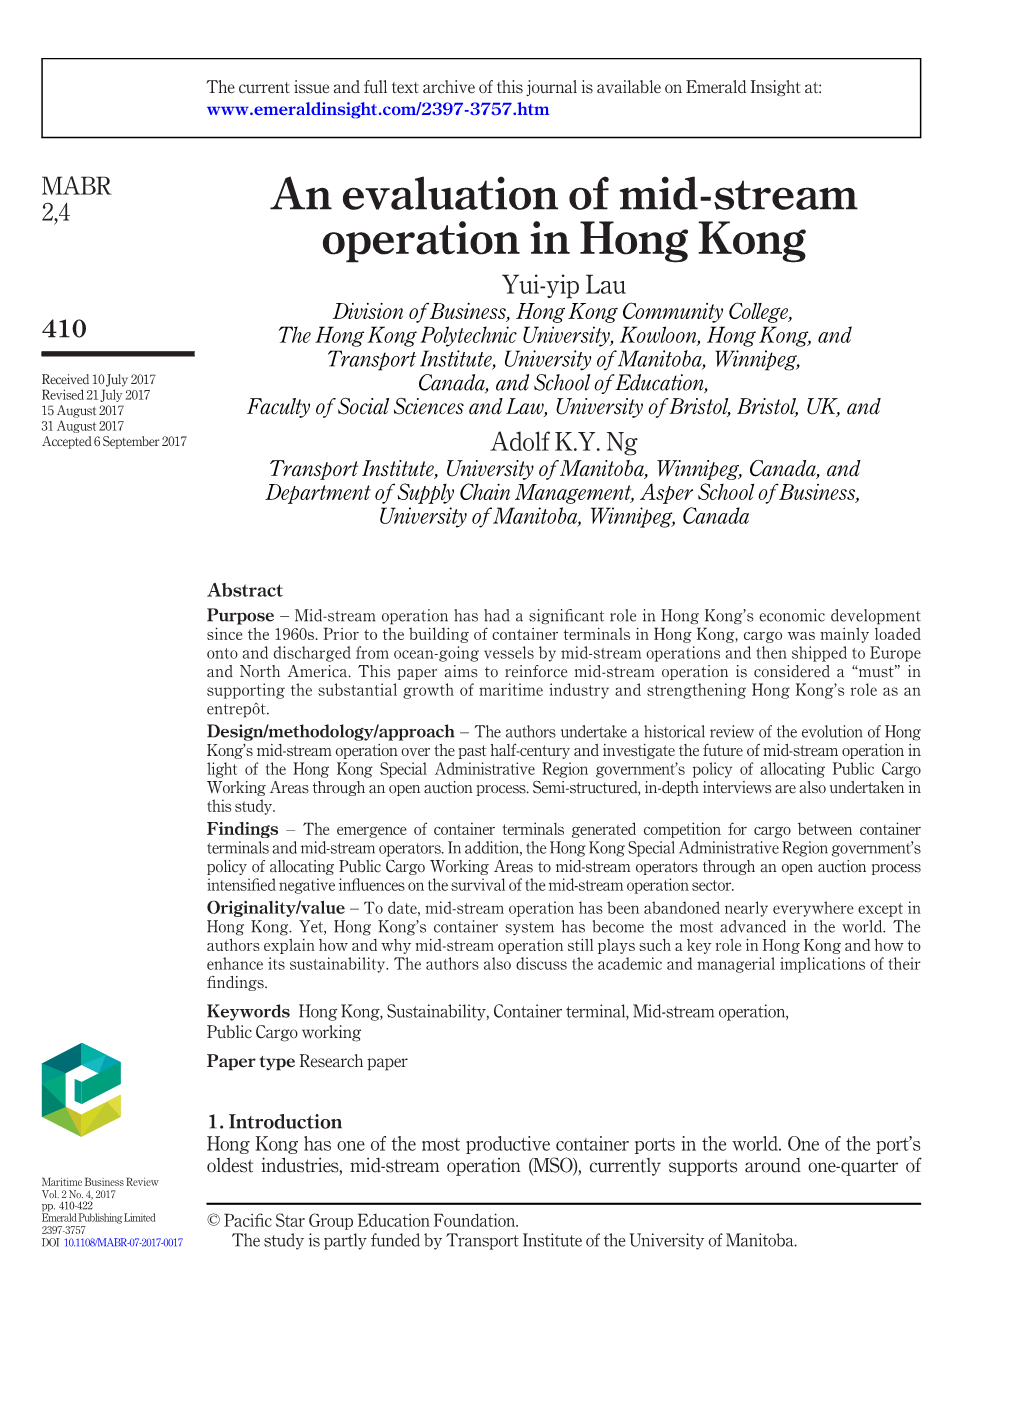 An Evaluation of Mid-Stream Operation in Hong Kong